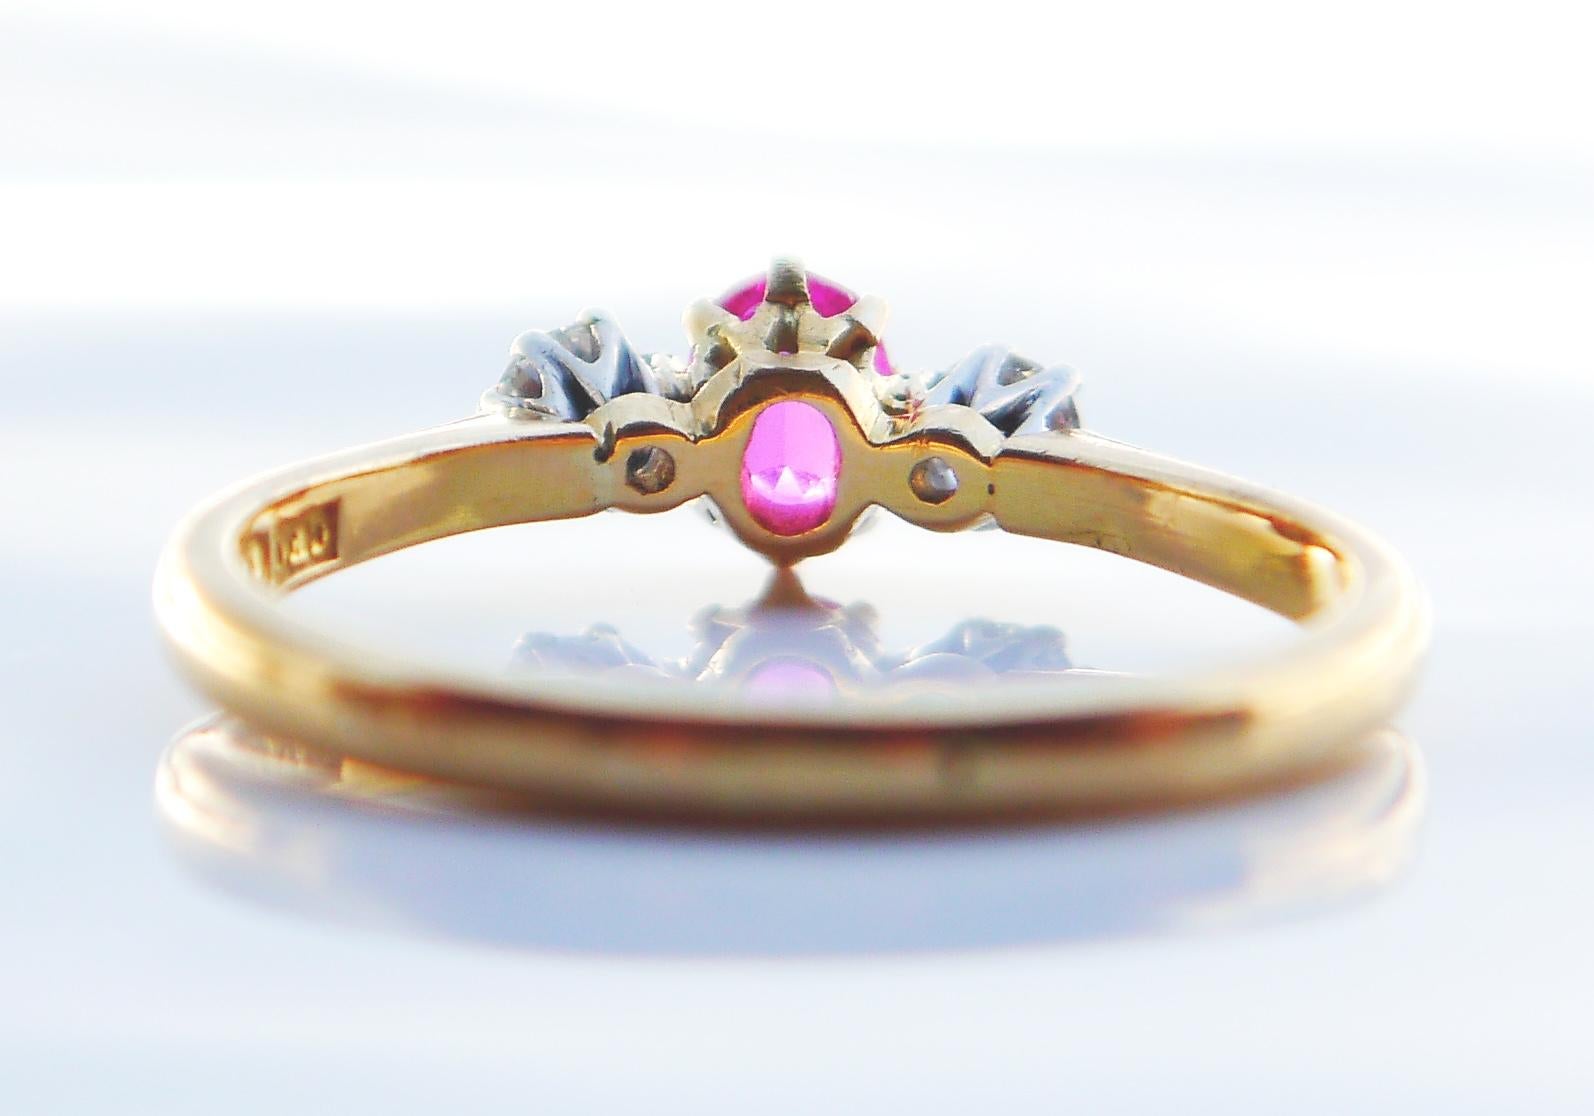 Elegant Ring in solid 18K Yellow Gold with Platinum clusters holding oval cut natural Rose Red Ruby and 2 brilliant cut Diamonds.

Custom made in Sweden, Stockholm, hallmarked 18K. Hallmarks of jeweler / the maker. Year marks P9 = made in 1964

Ruby